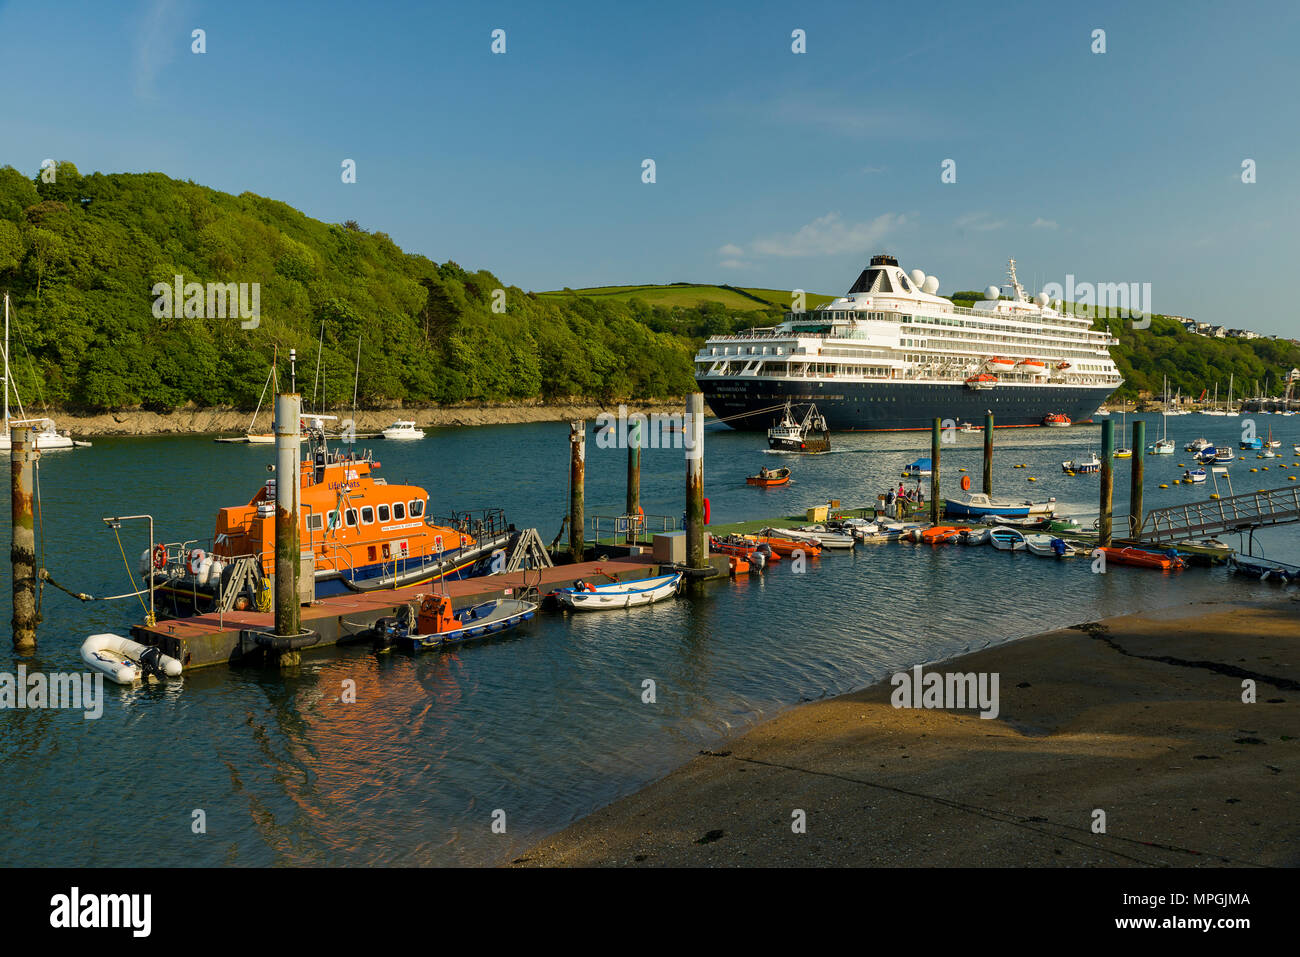 The Prinsendam, a Dutch cruise line company anchors in Fowey, Cornwall for a day trip before heading off to the Scilly Isles as it journeys around the Stock Photo